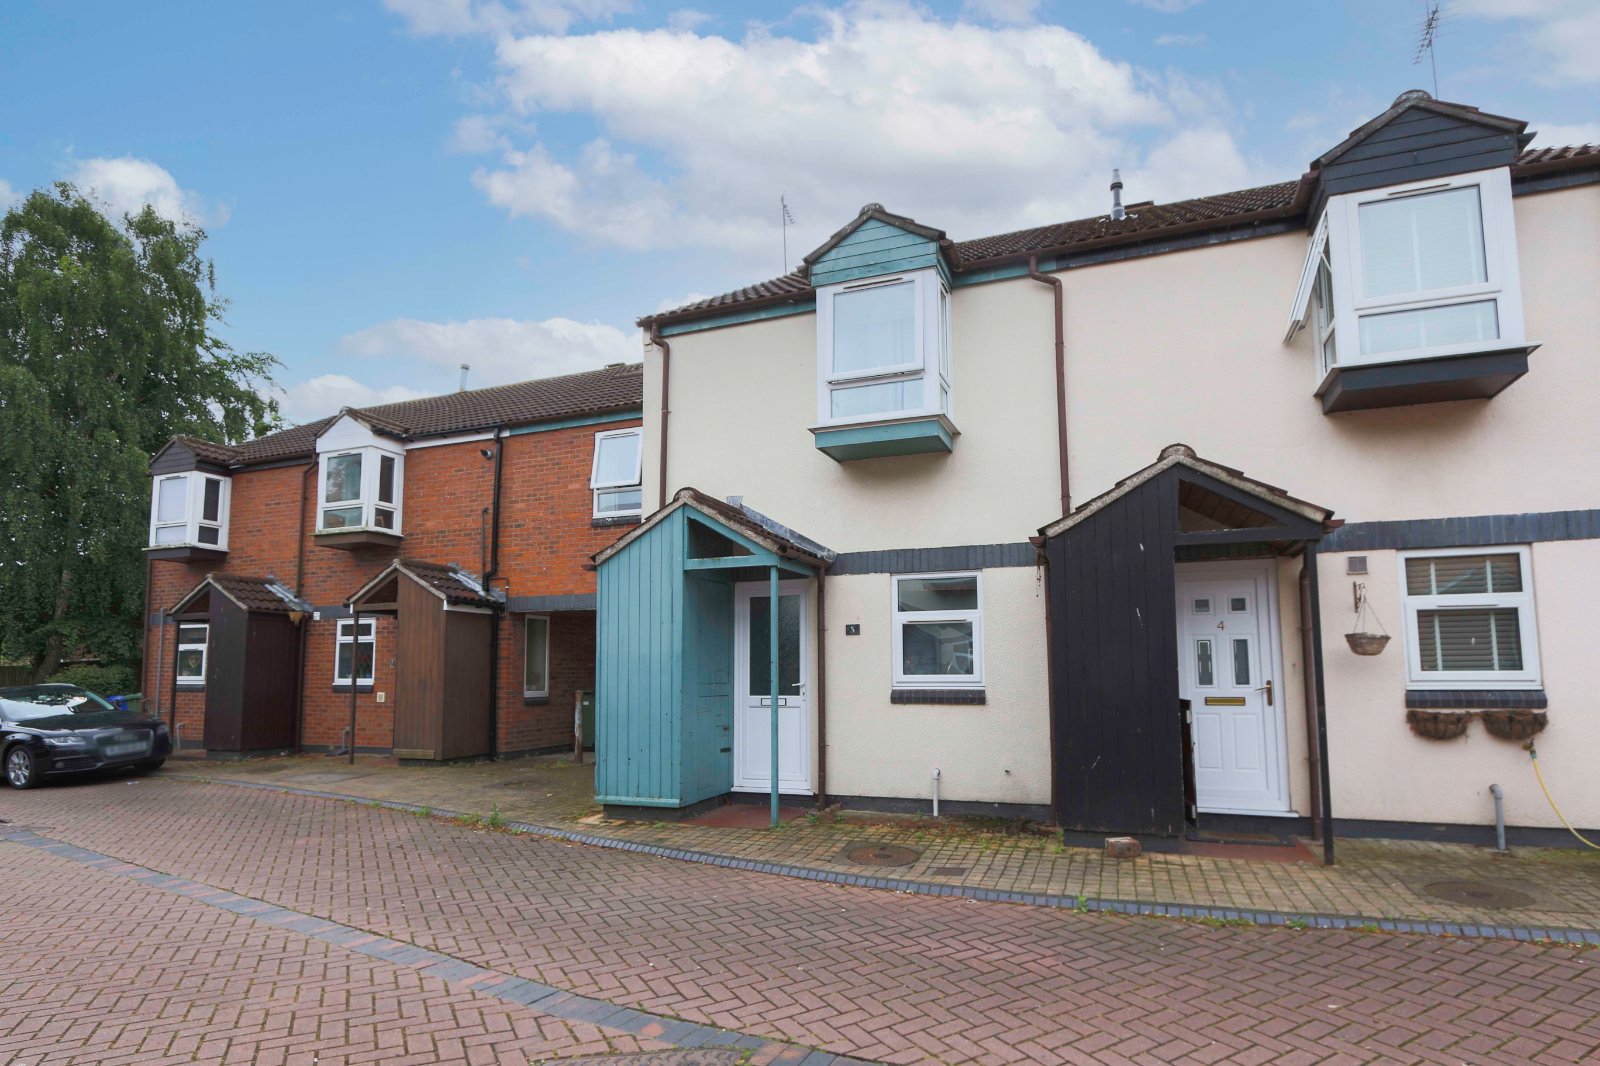 3 bed house for sale in Godbold Close, Beverley, HU17